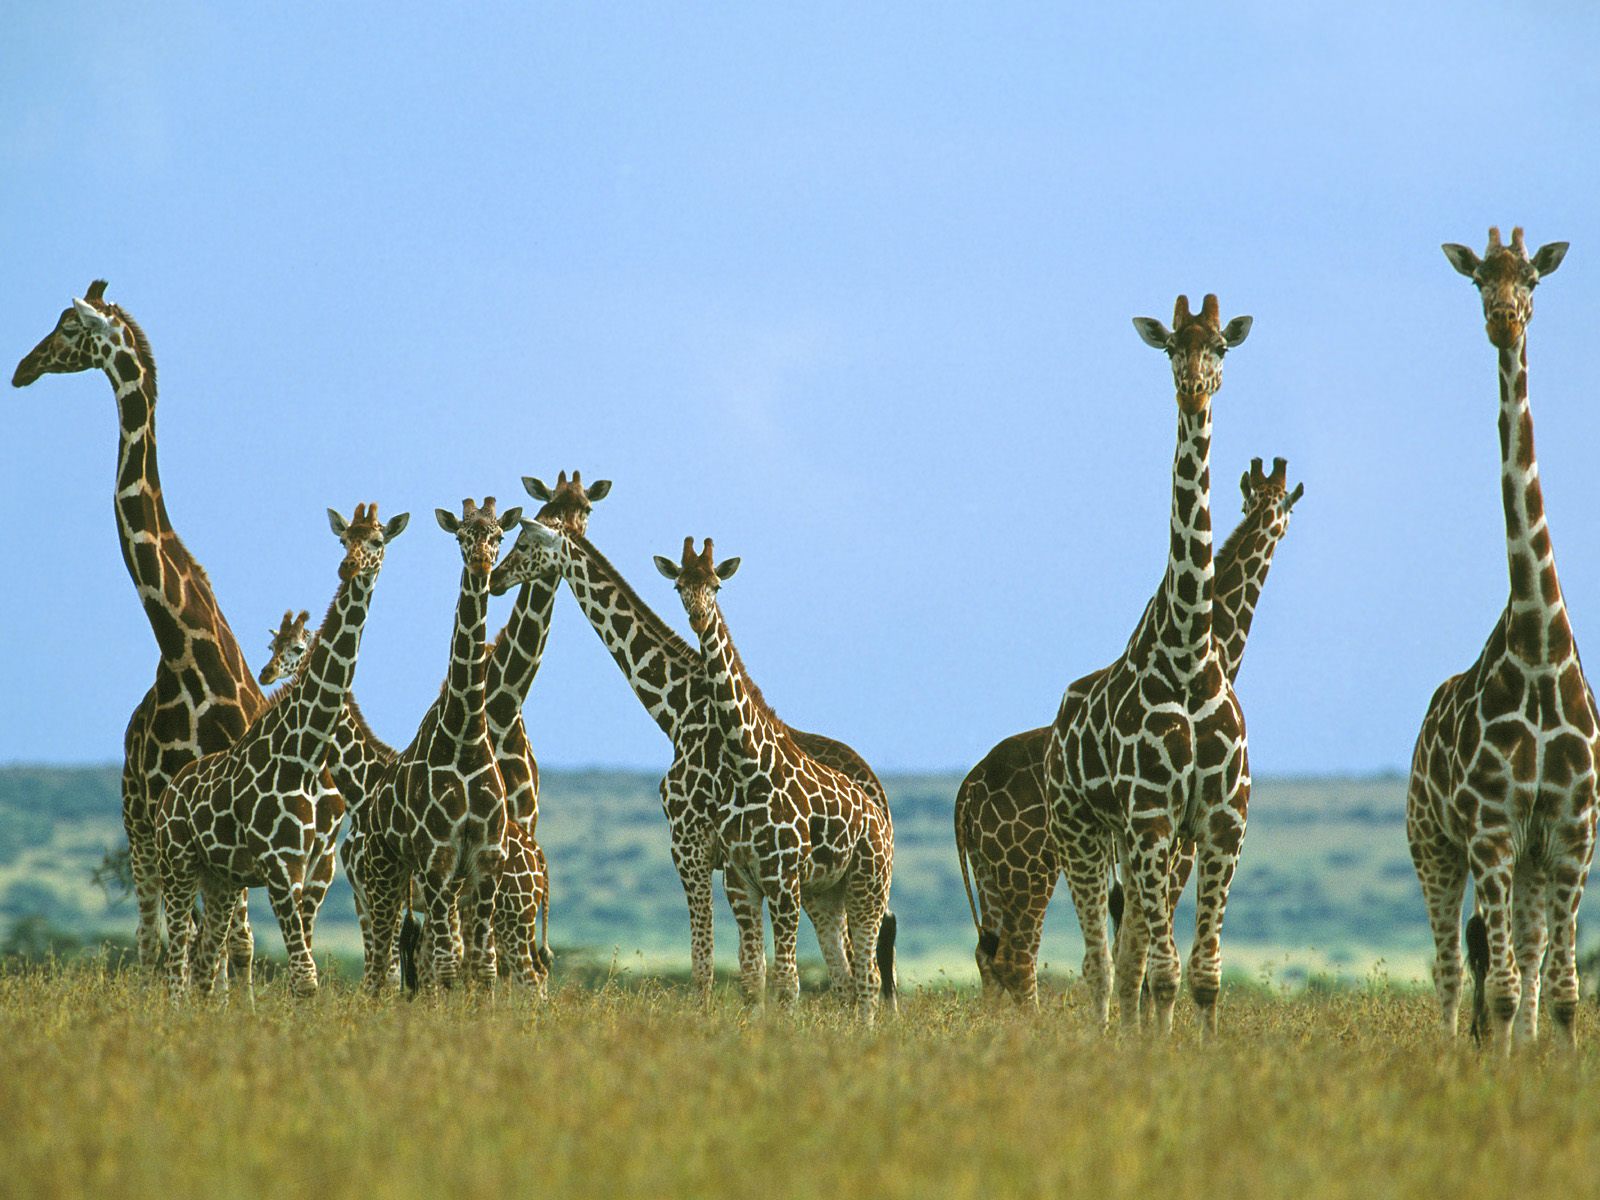 Giraffes Image HD Wallpaper And Background